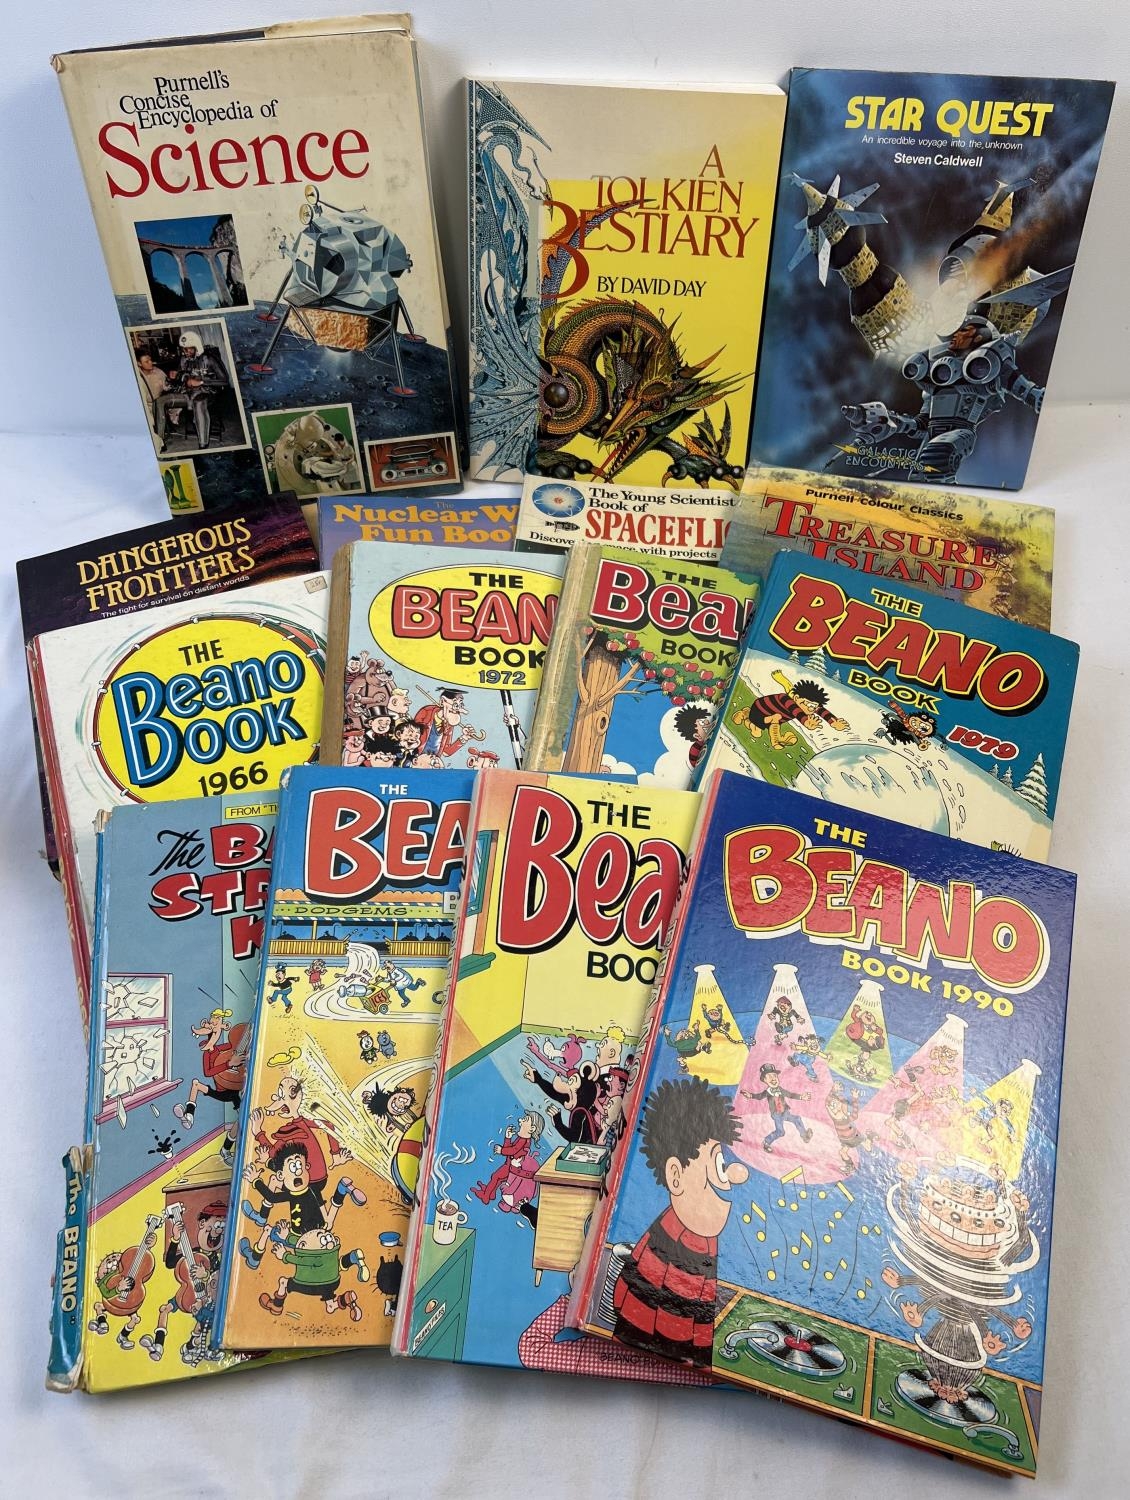 A collection of vintage childrens books and annuals. To include Beano annuals, A Tolkien Bestiary by